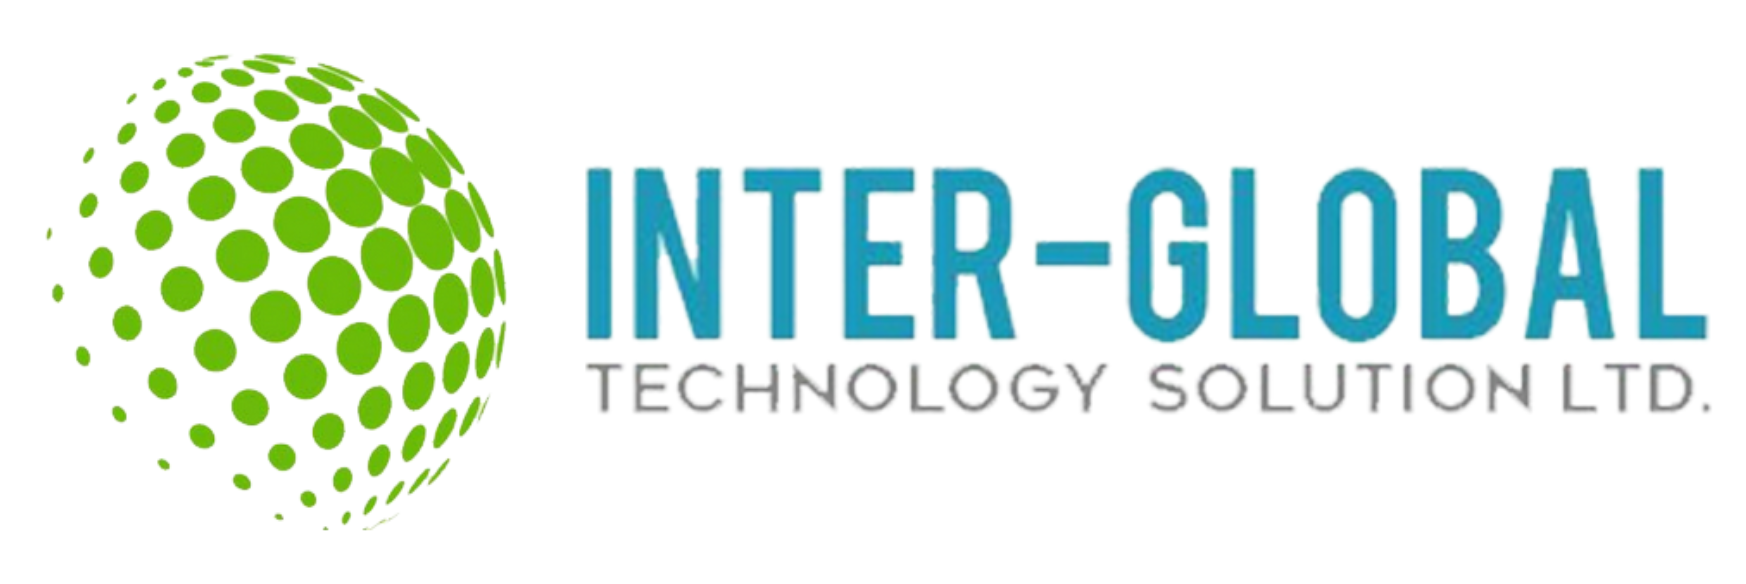 Interglobal Technology Solution Limited